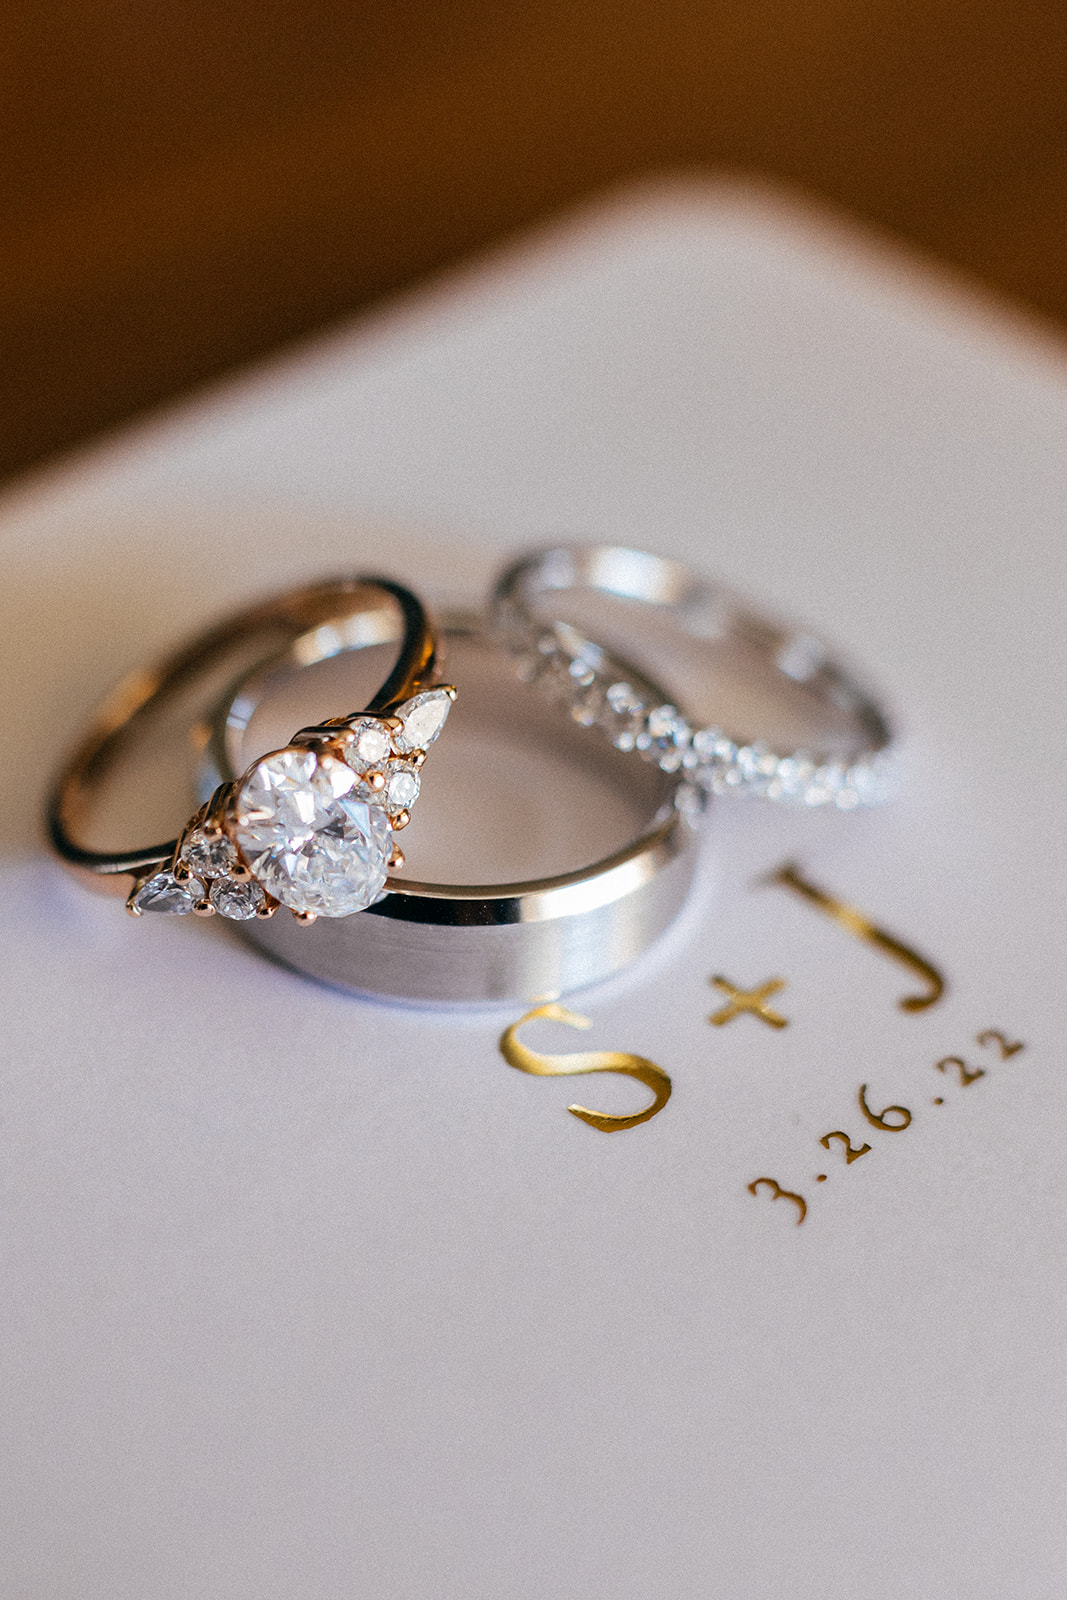 A pair of ring's on a table